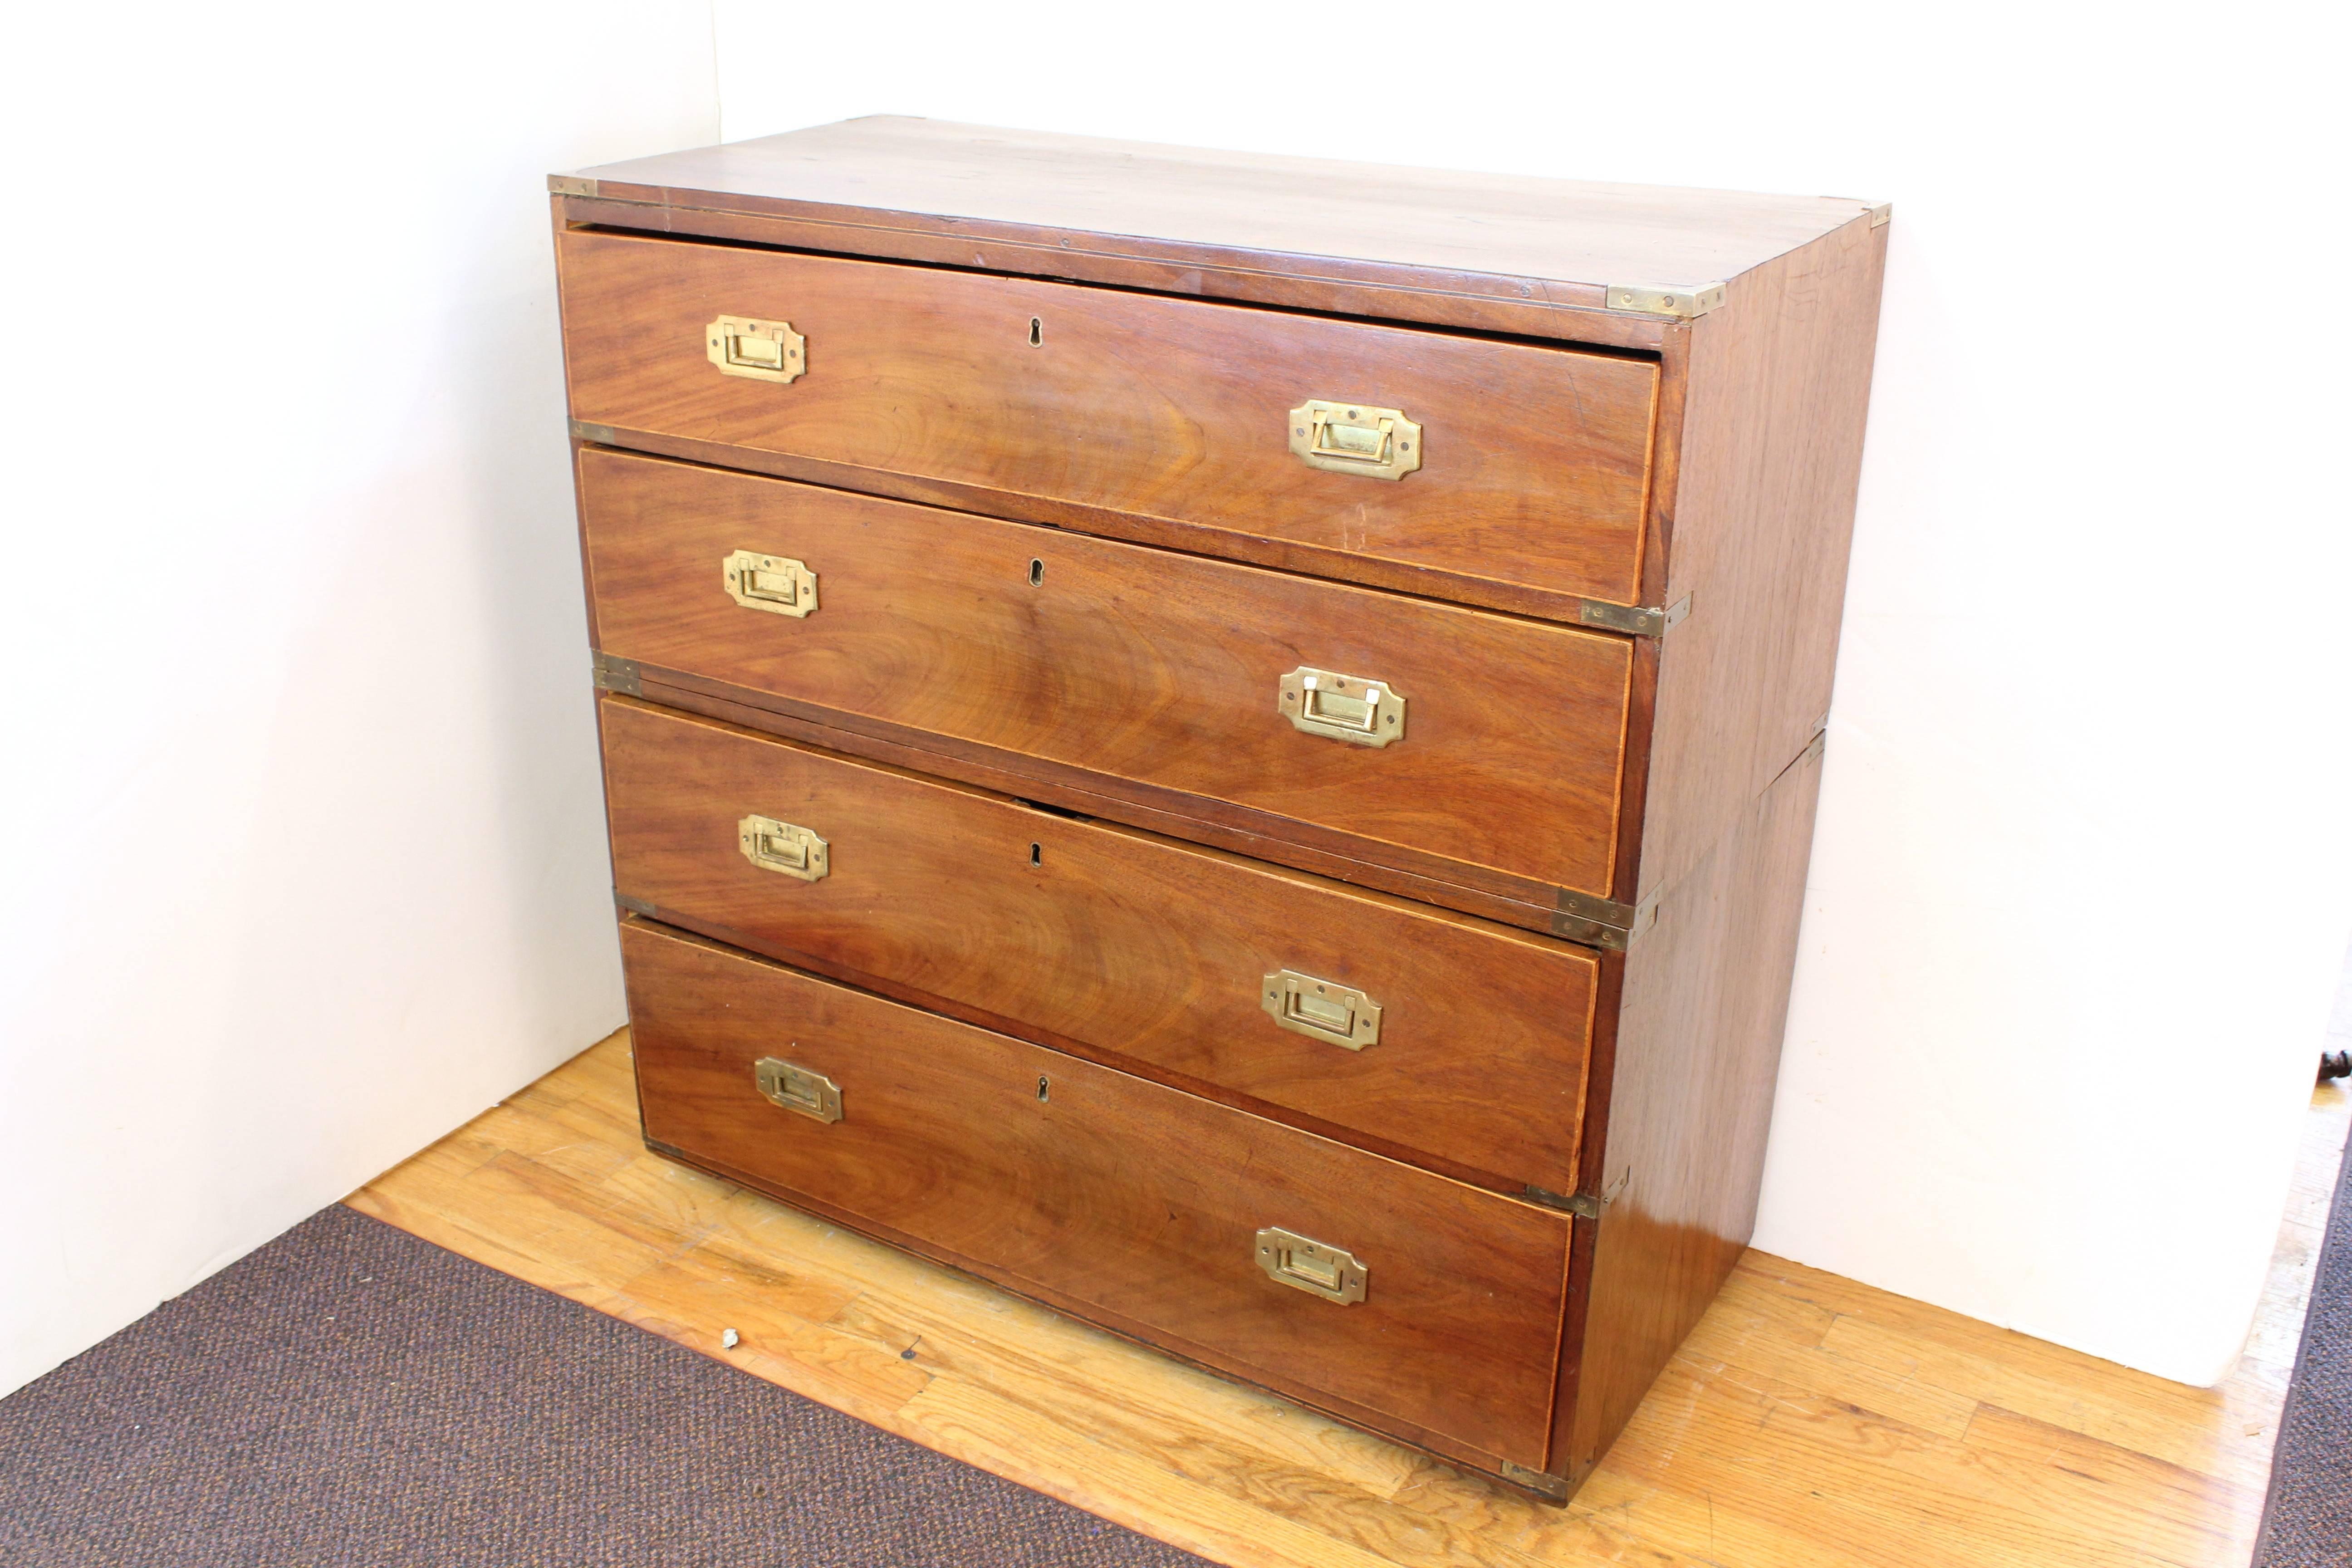 A mahogany wood campaign chest in two segments, made in the 1860s, of the Victorian era. Flush-mounted hardware and recessed handles in brass. Four full-length drawers, two on each segment. In overall good vintage condition with age appropriate wear